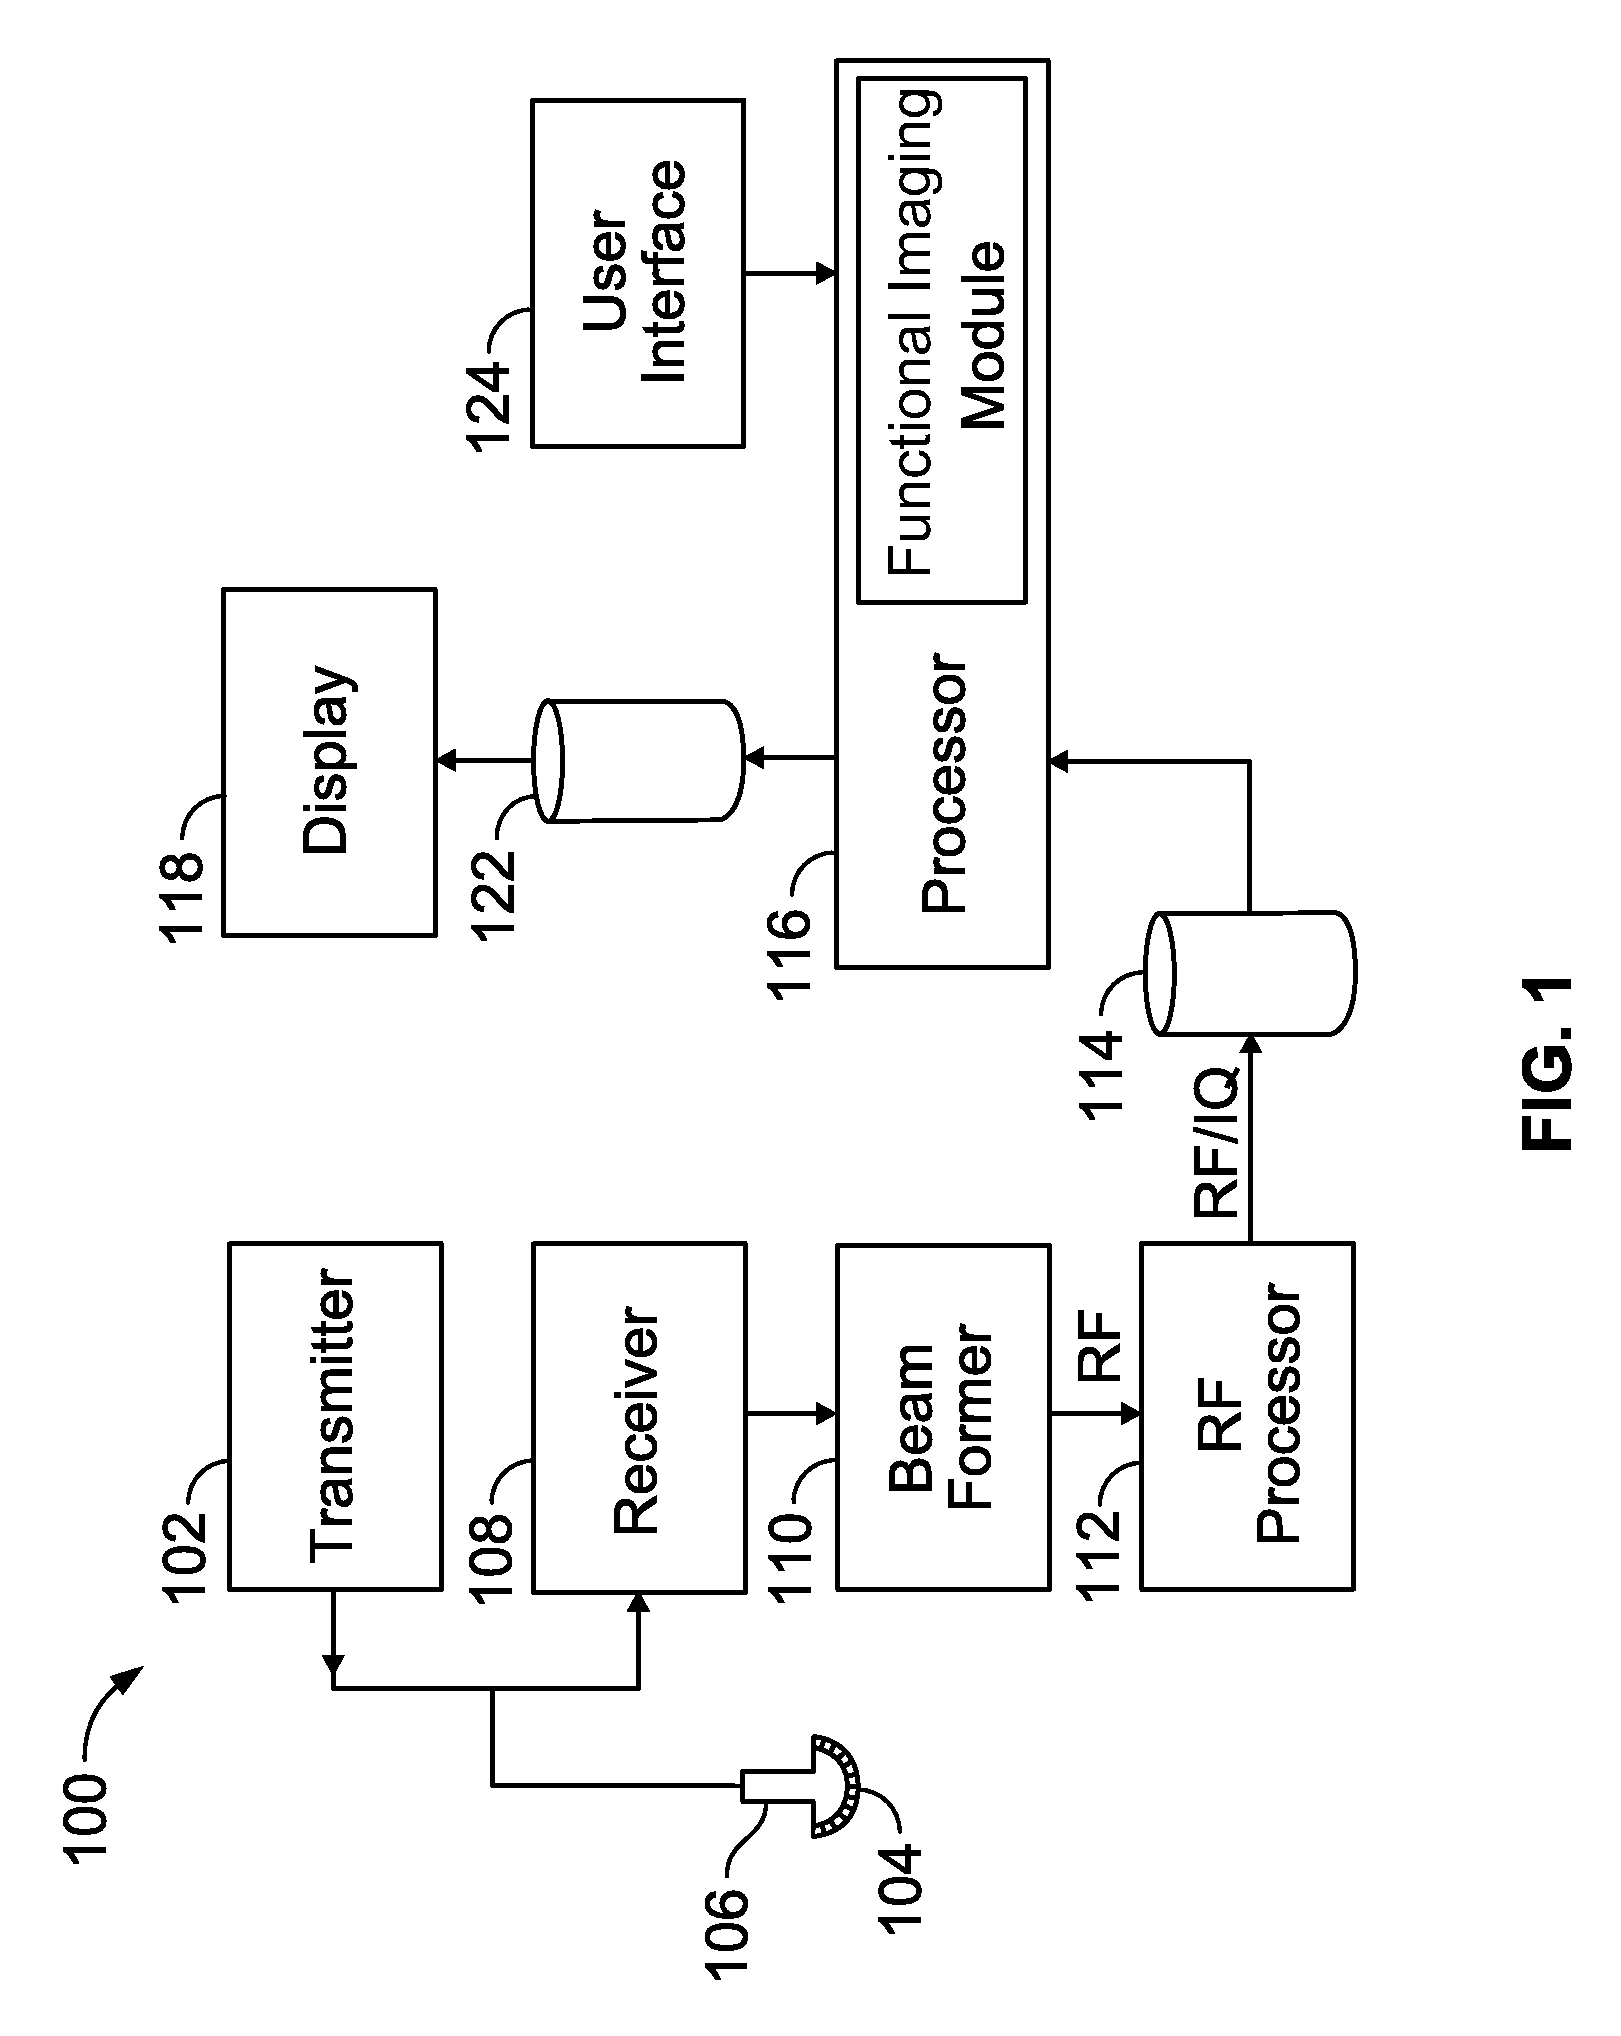 System and method for functional ultrasound imaging